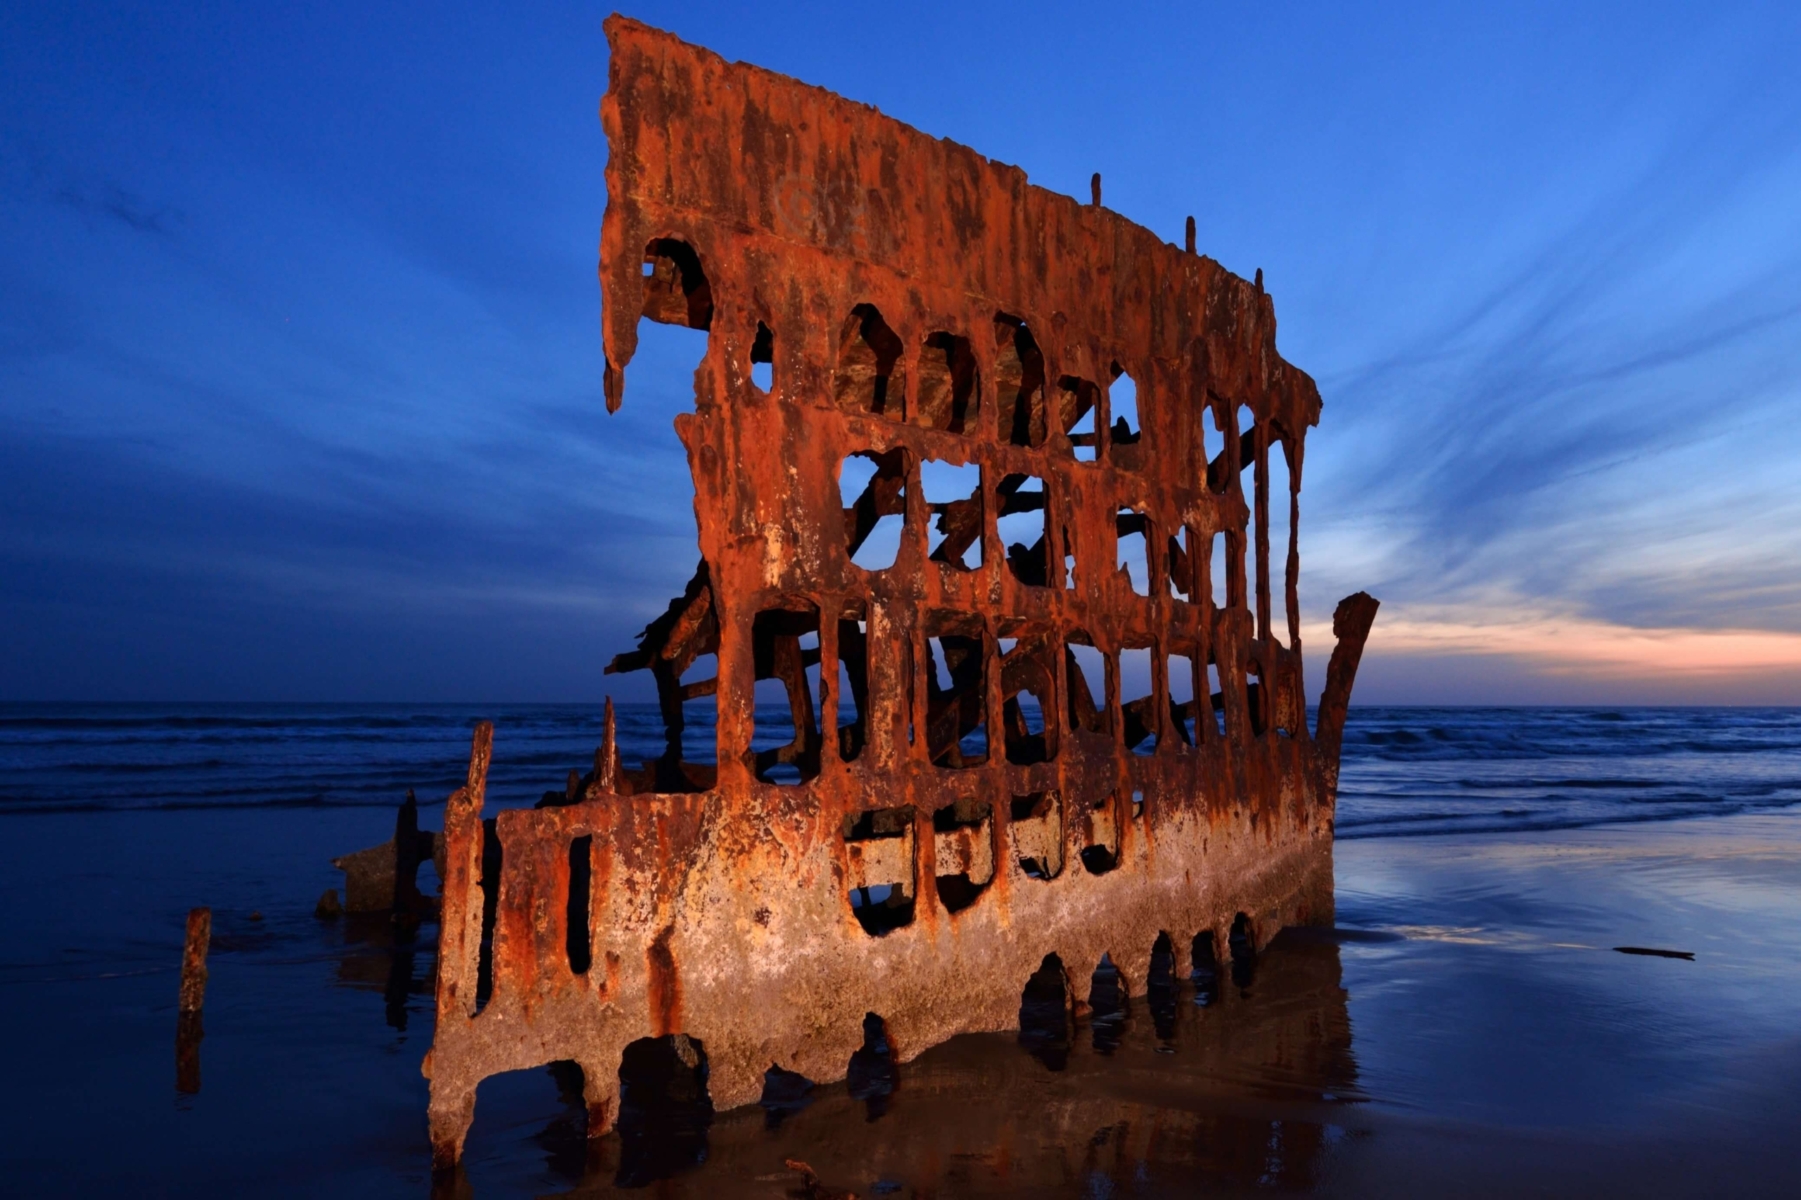 The wreck of the Peter Iredale an important piece of Astoria History.